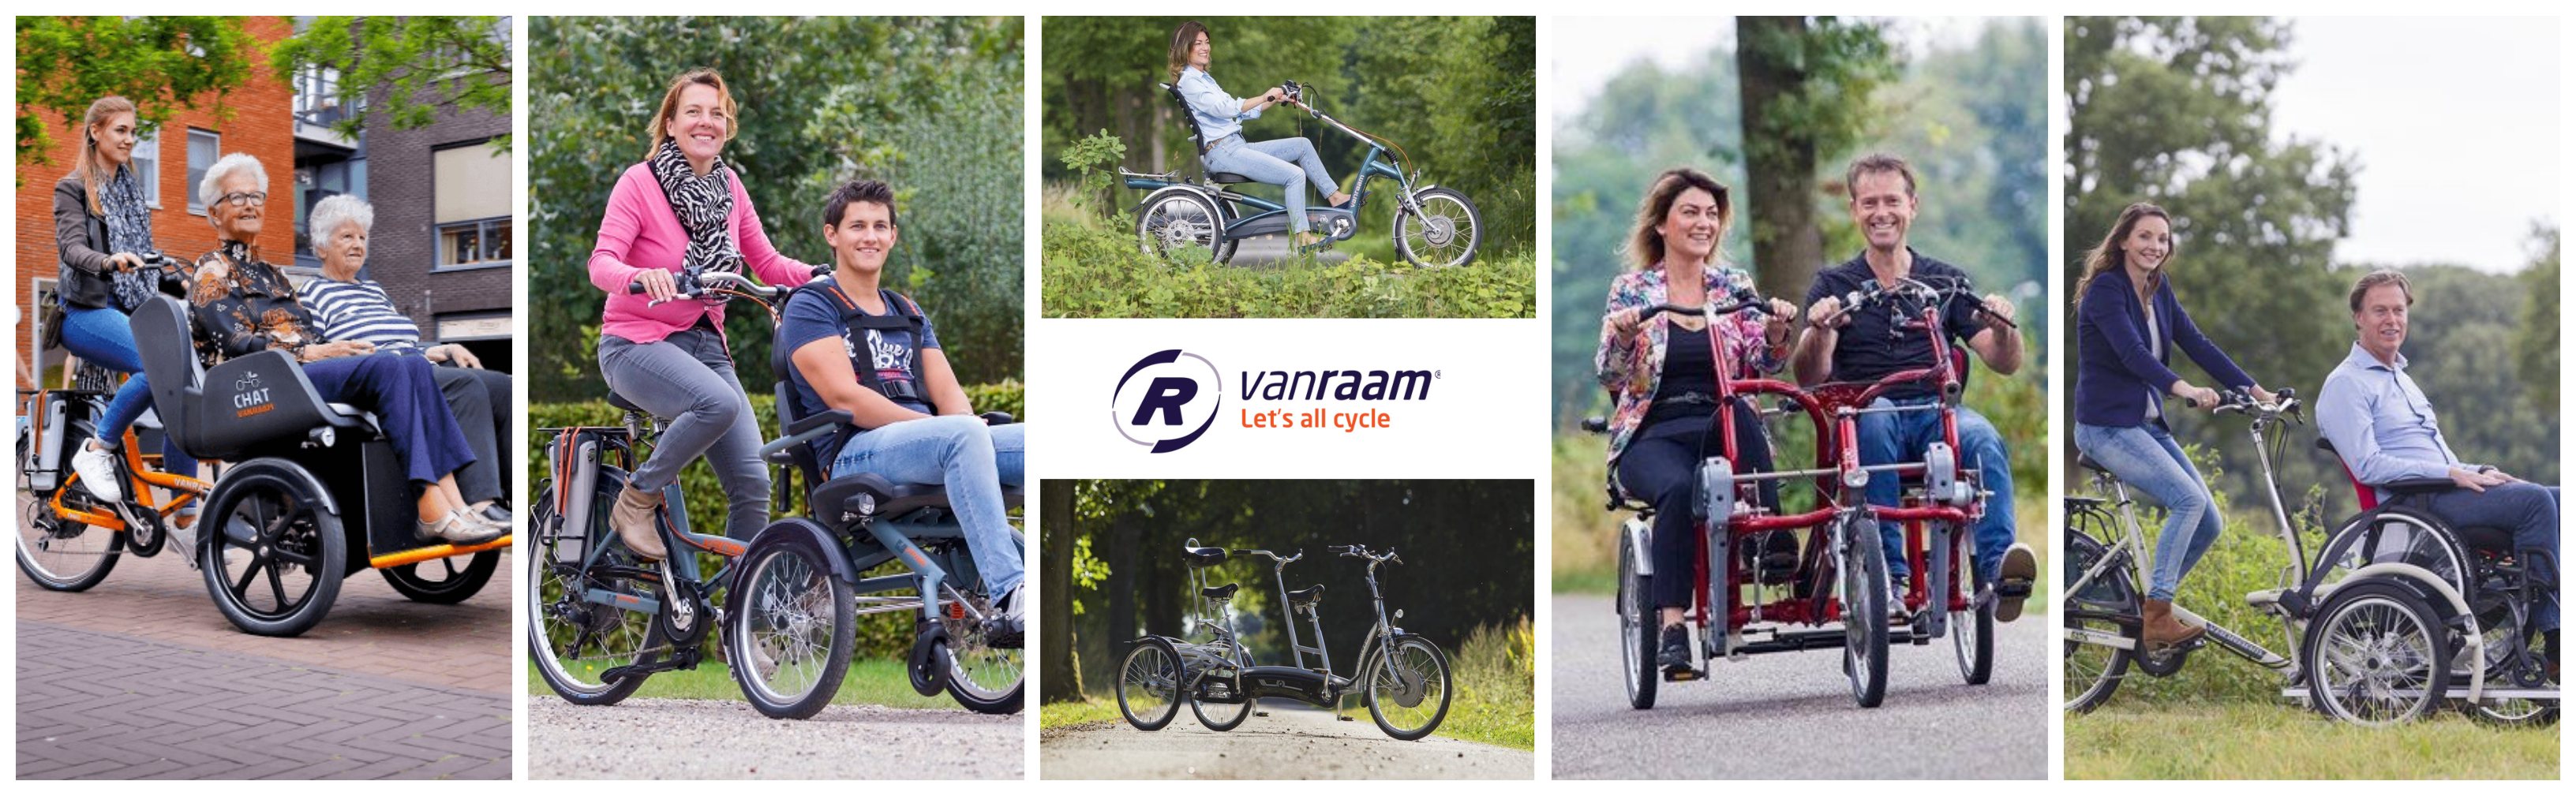 VanRaam produces uniquely special needs bicycles and specializes in tricycles, scooter bikes, wheelchair bikes, tandem bikes, double rider bikes, and low step through bikes.